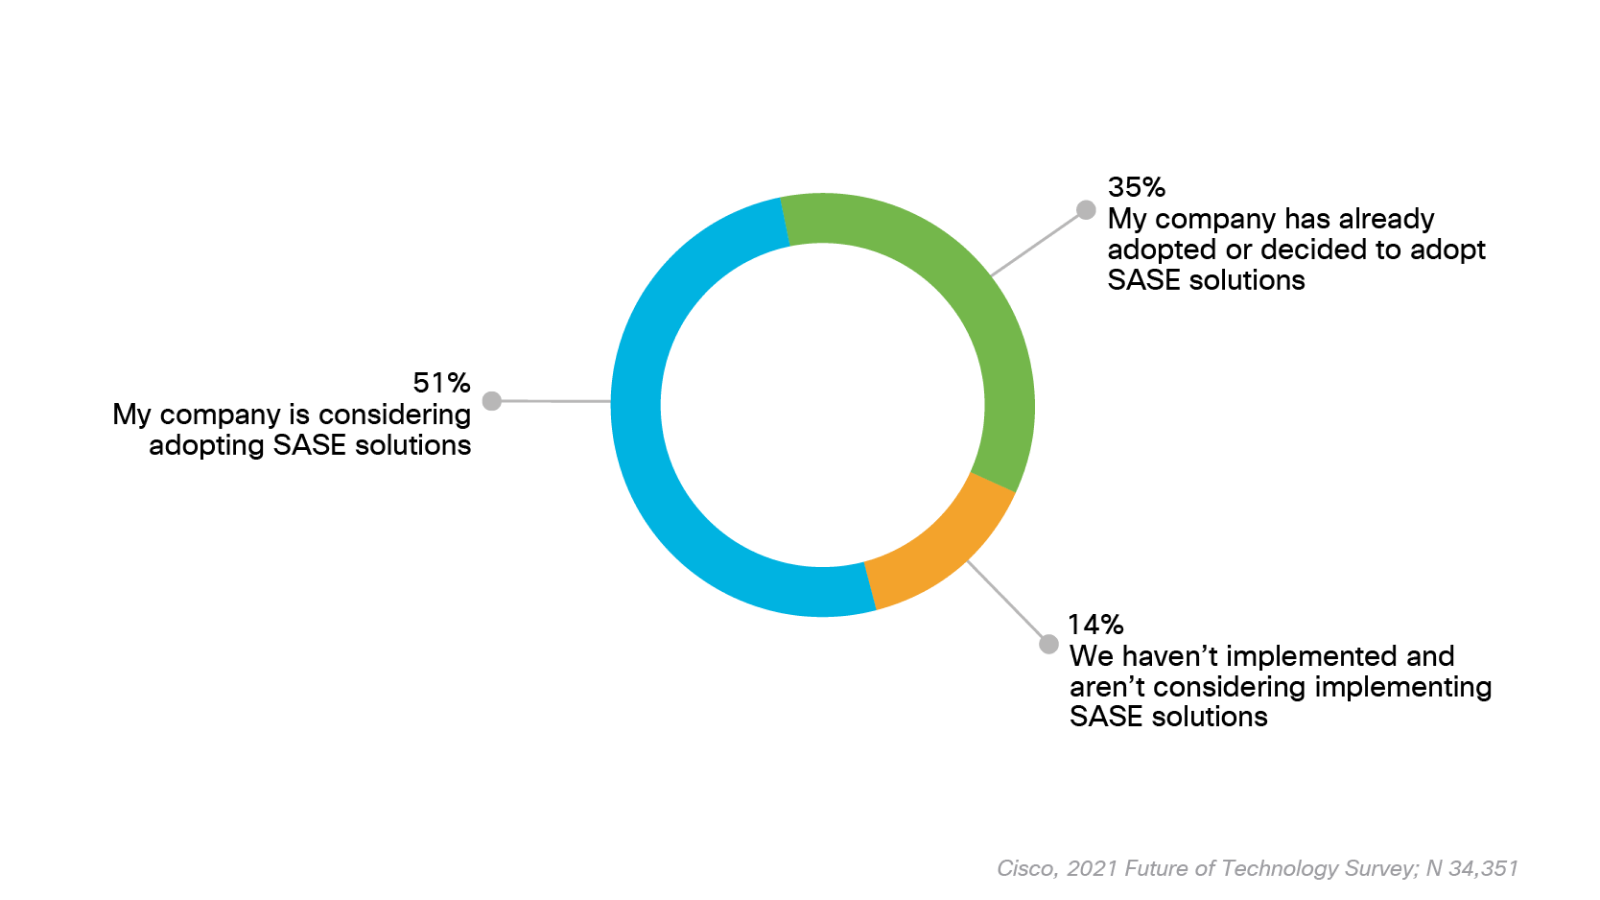 Graph showing percentage of respondents considering adopting SASE solutions. 51% considering adopting SASE solutions, 35% already adopted or decided to adopt SASE solutions, 14% not considering implementing SASE solutions.